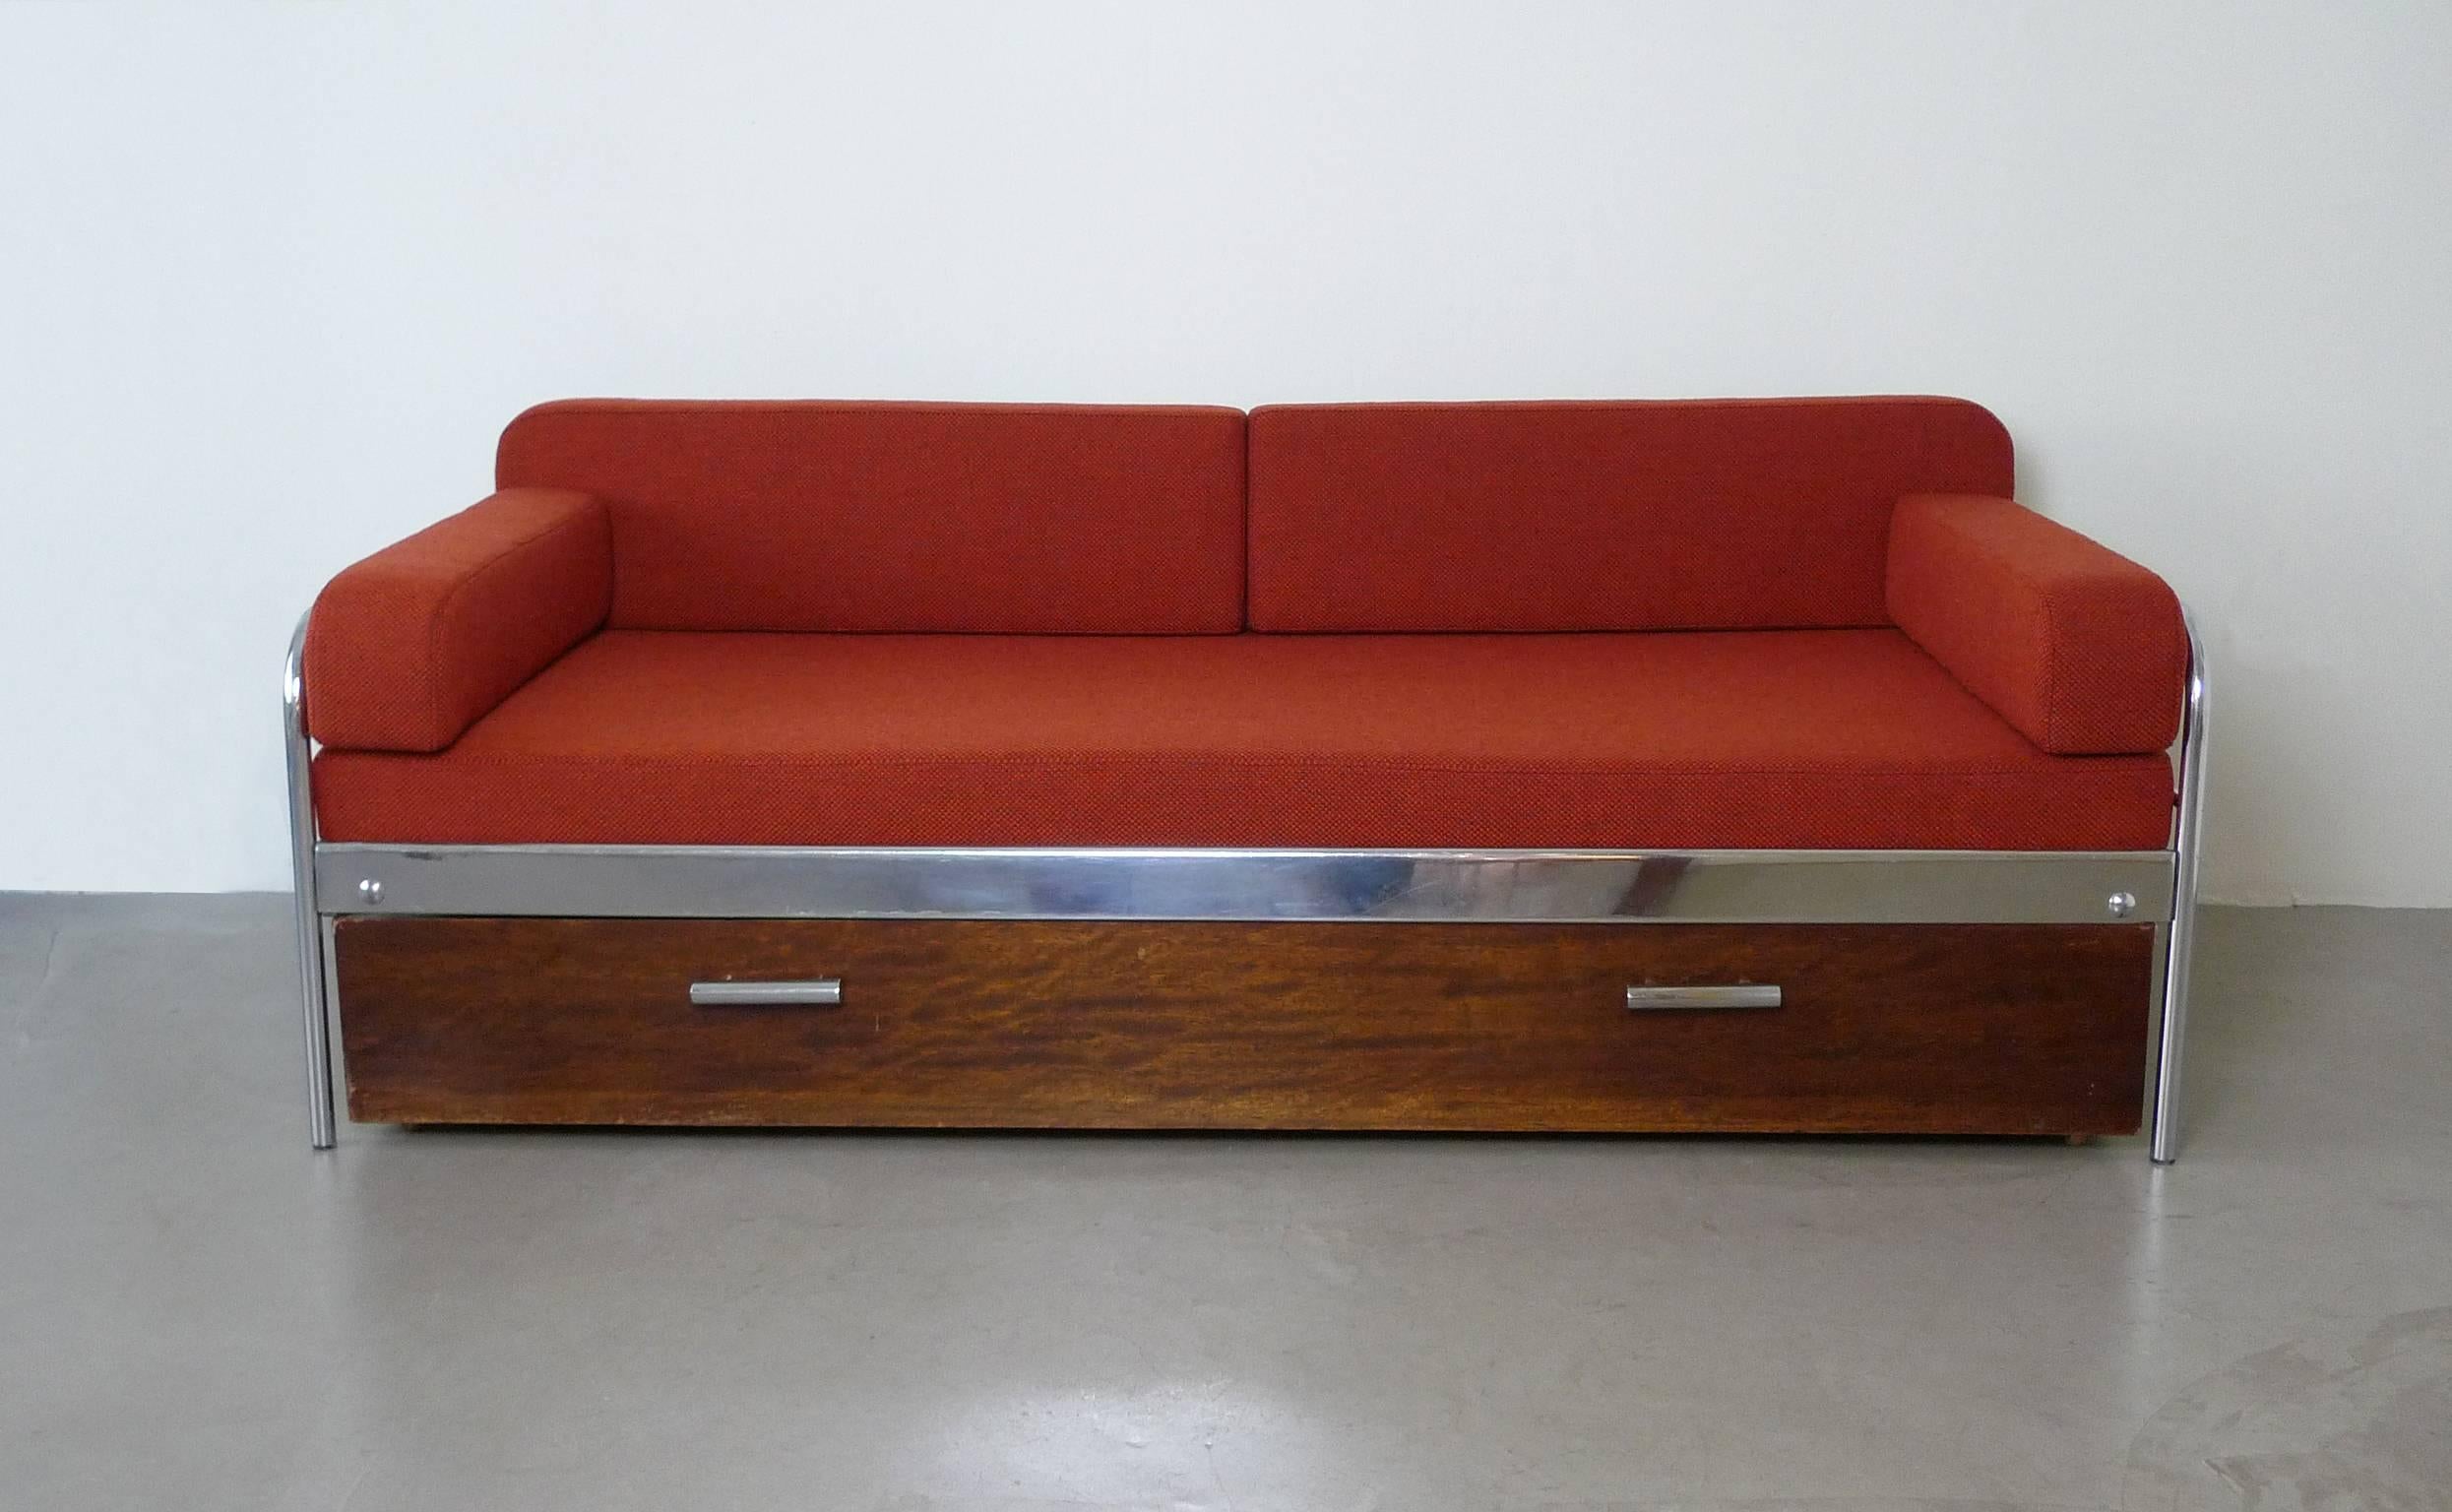 This three-seat sofa with bedding box was produced by the Czech company Mücke & Melder in the 1930s. It has a steel tube frame and a wooden bedding box with chromed holders. Upholstery and fabric are renewed.